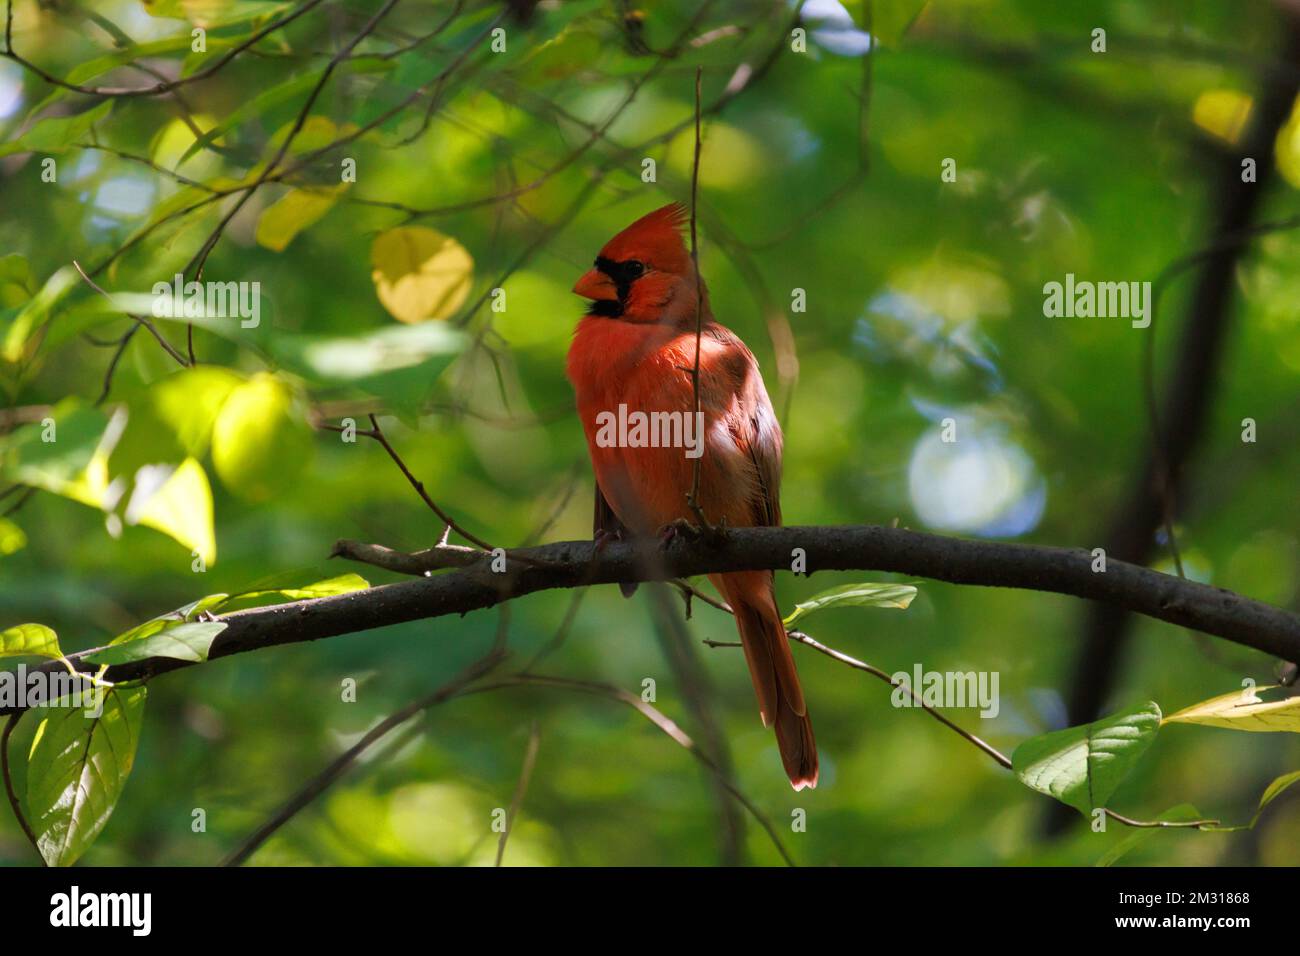 male northern cardinal perched on a tree branch among green foliage in a forest in profile Stock Photo